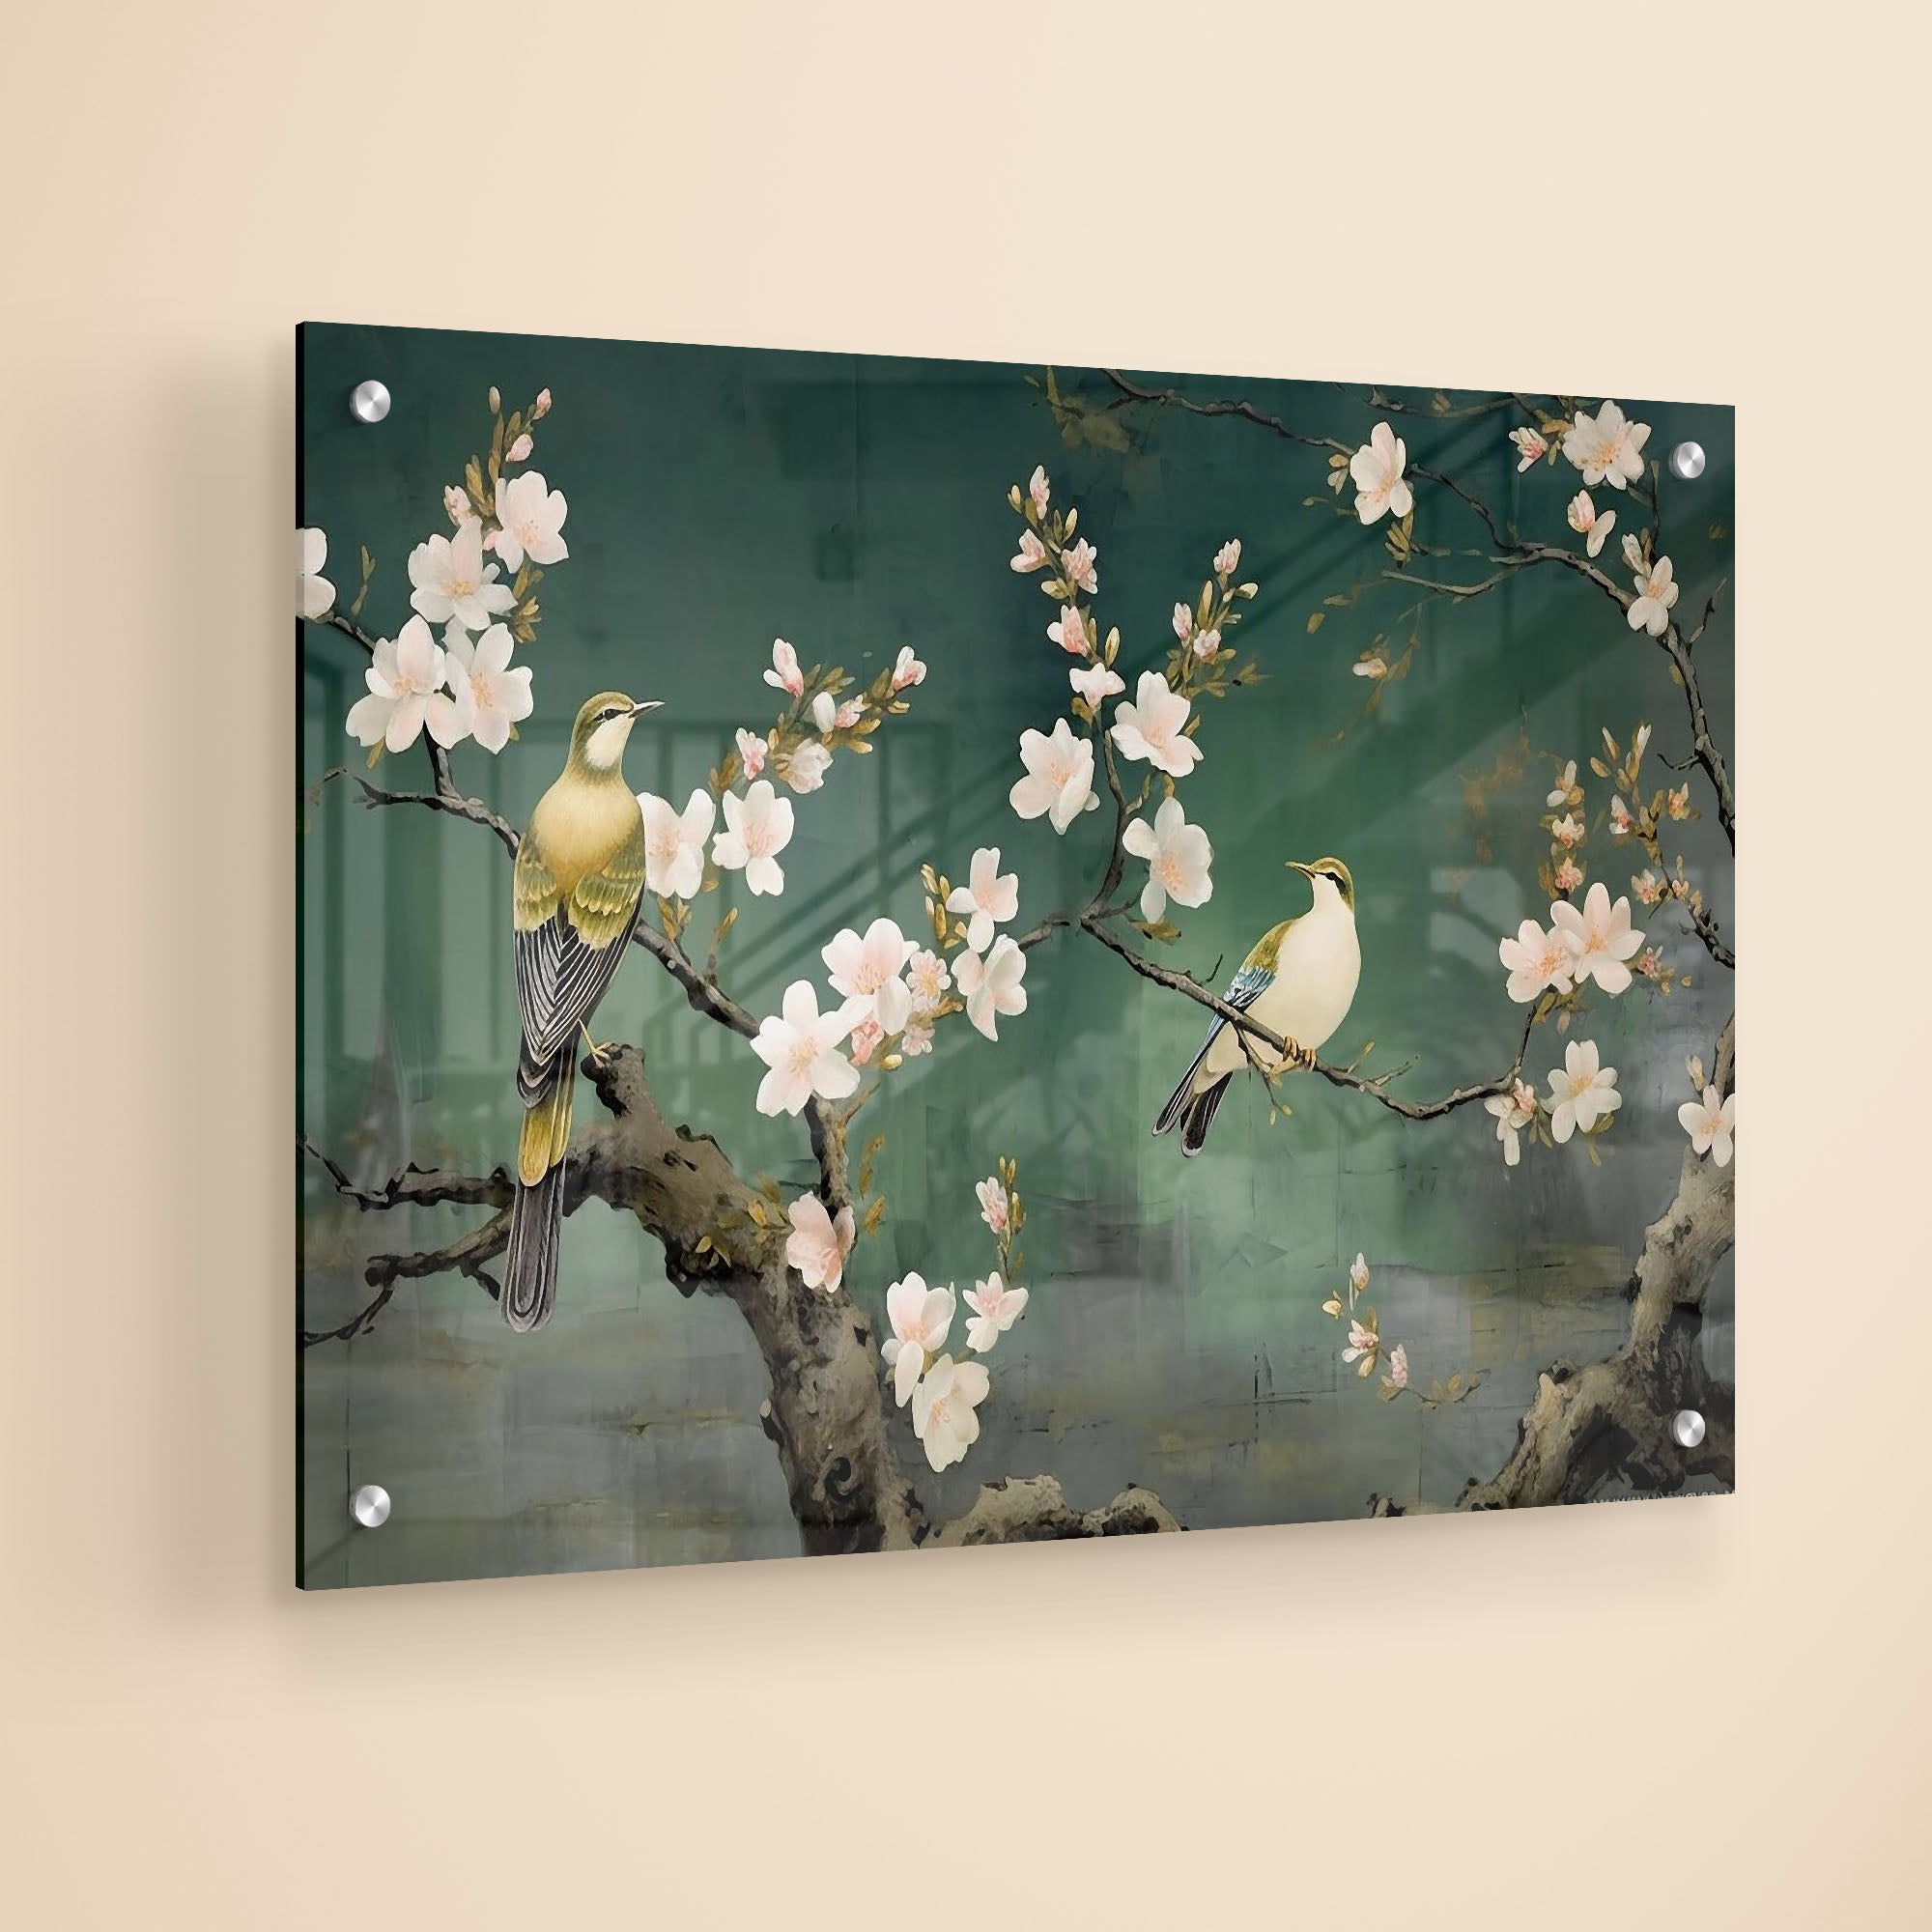 Flower Tree And Birds Acrylic Wall Painting